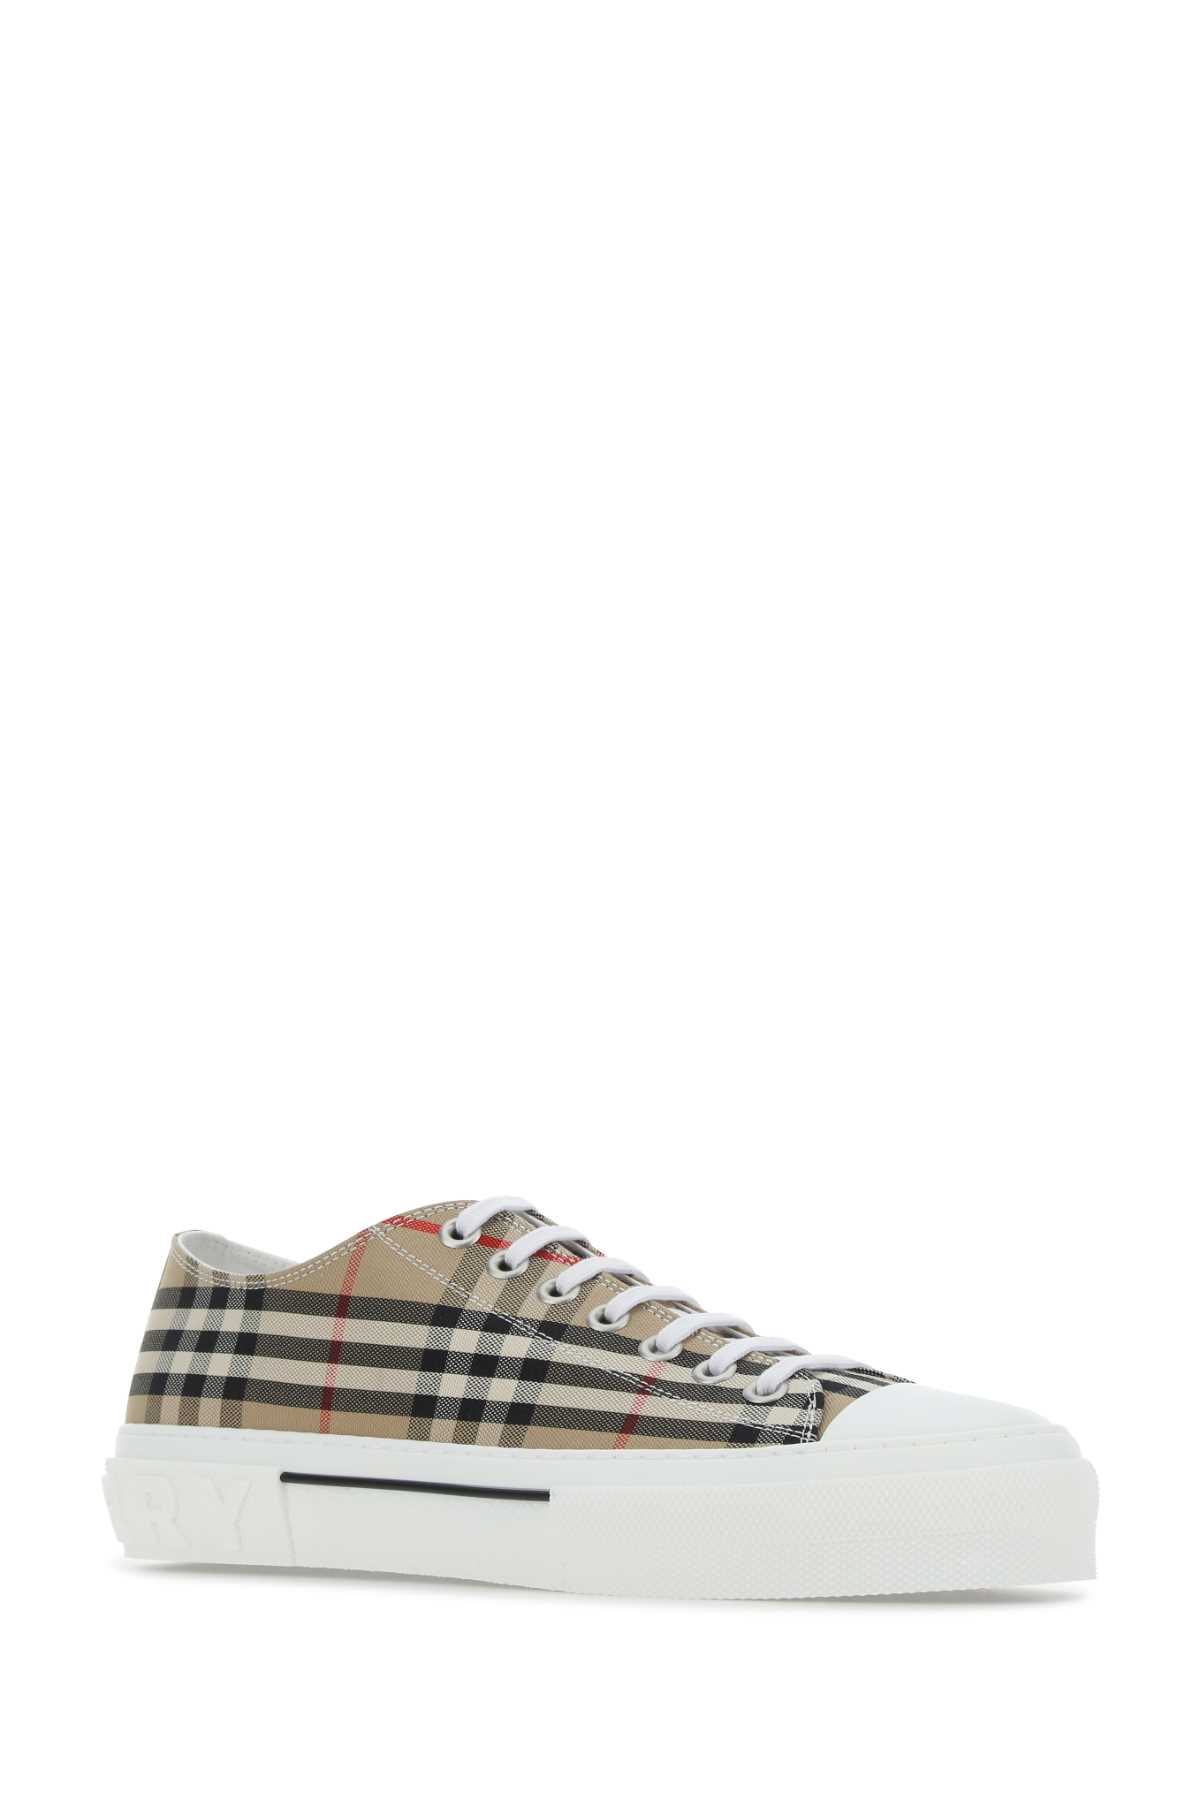 Burberry Embroidered Canvas Trainers In A7028